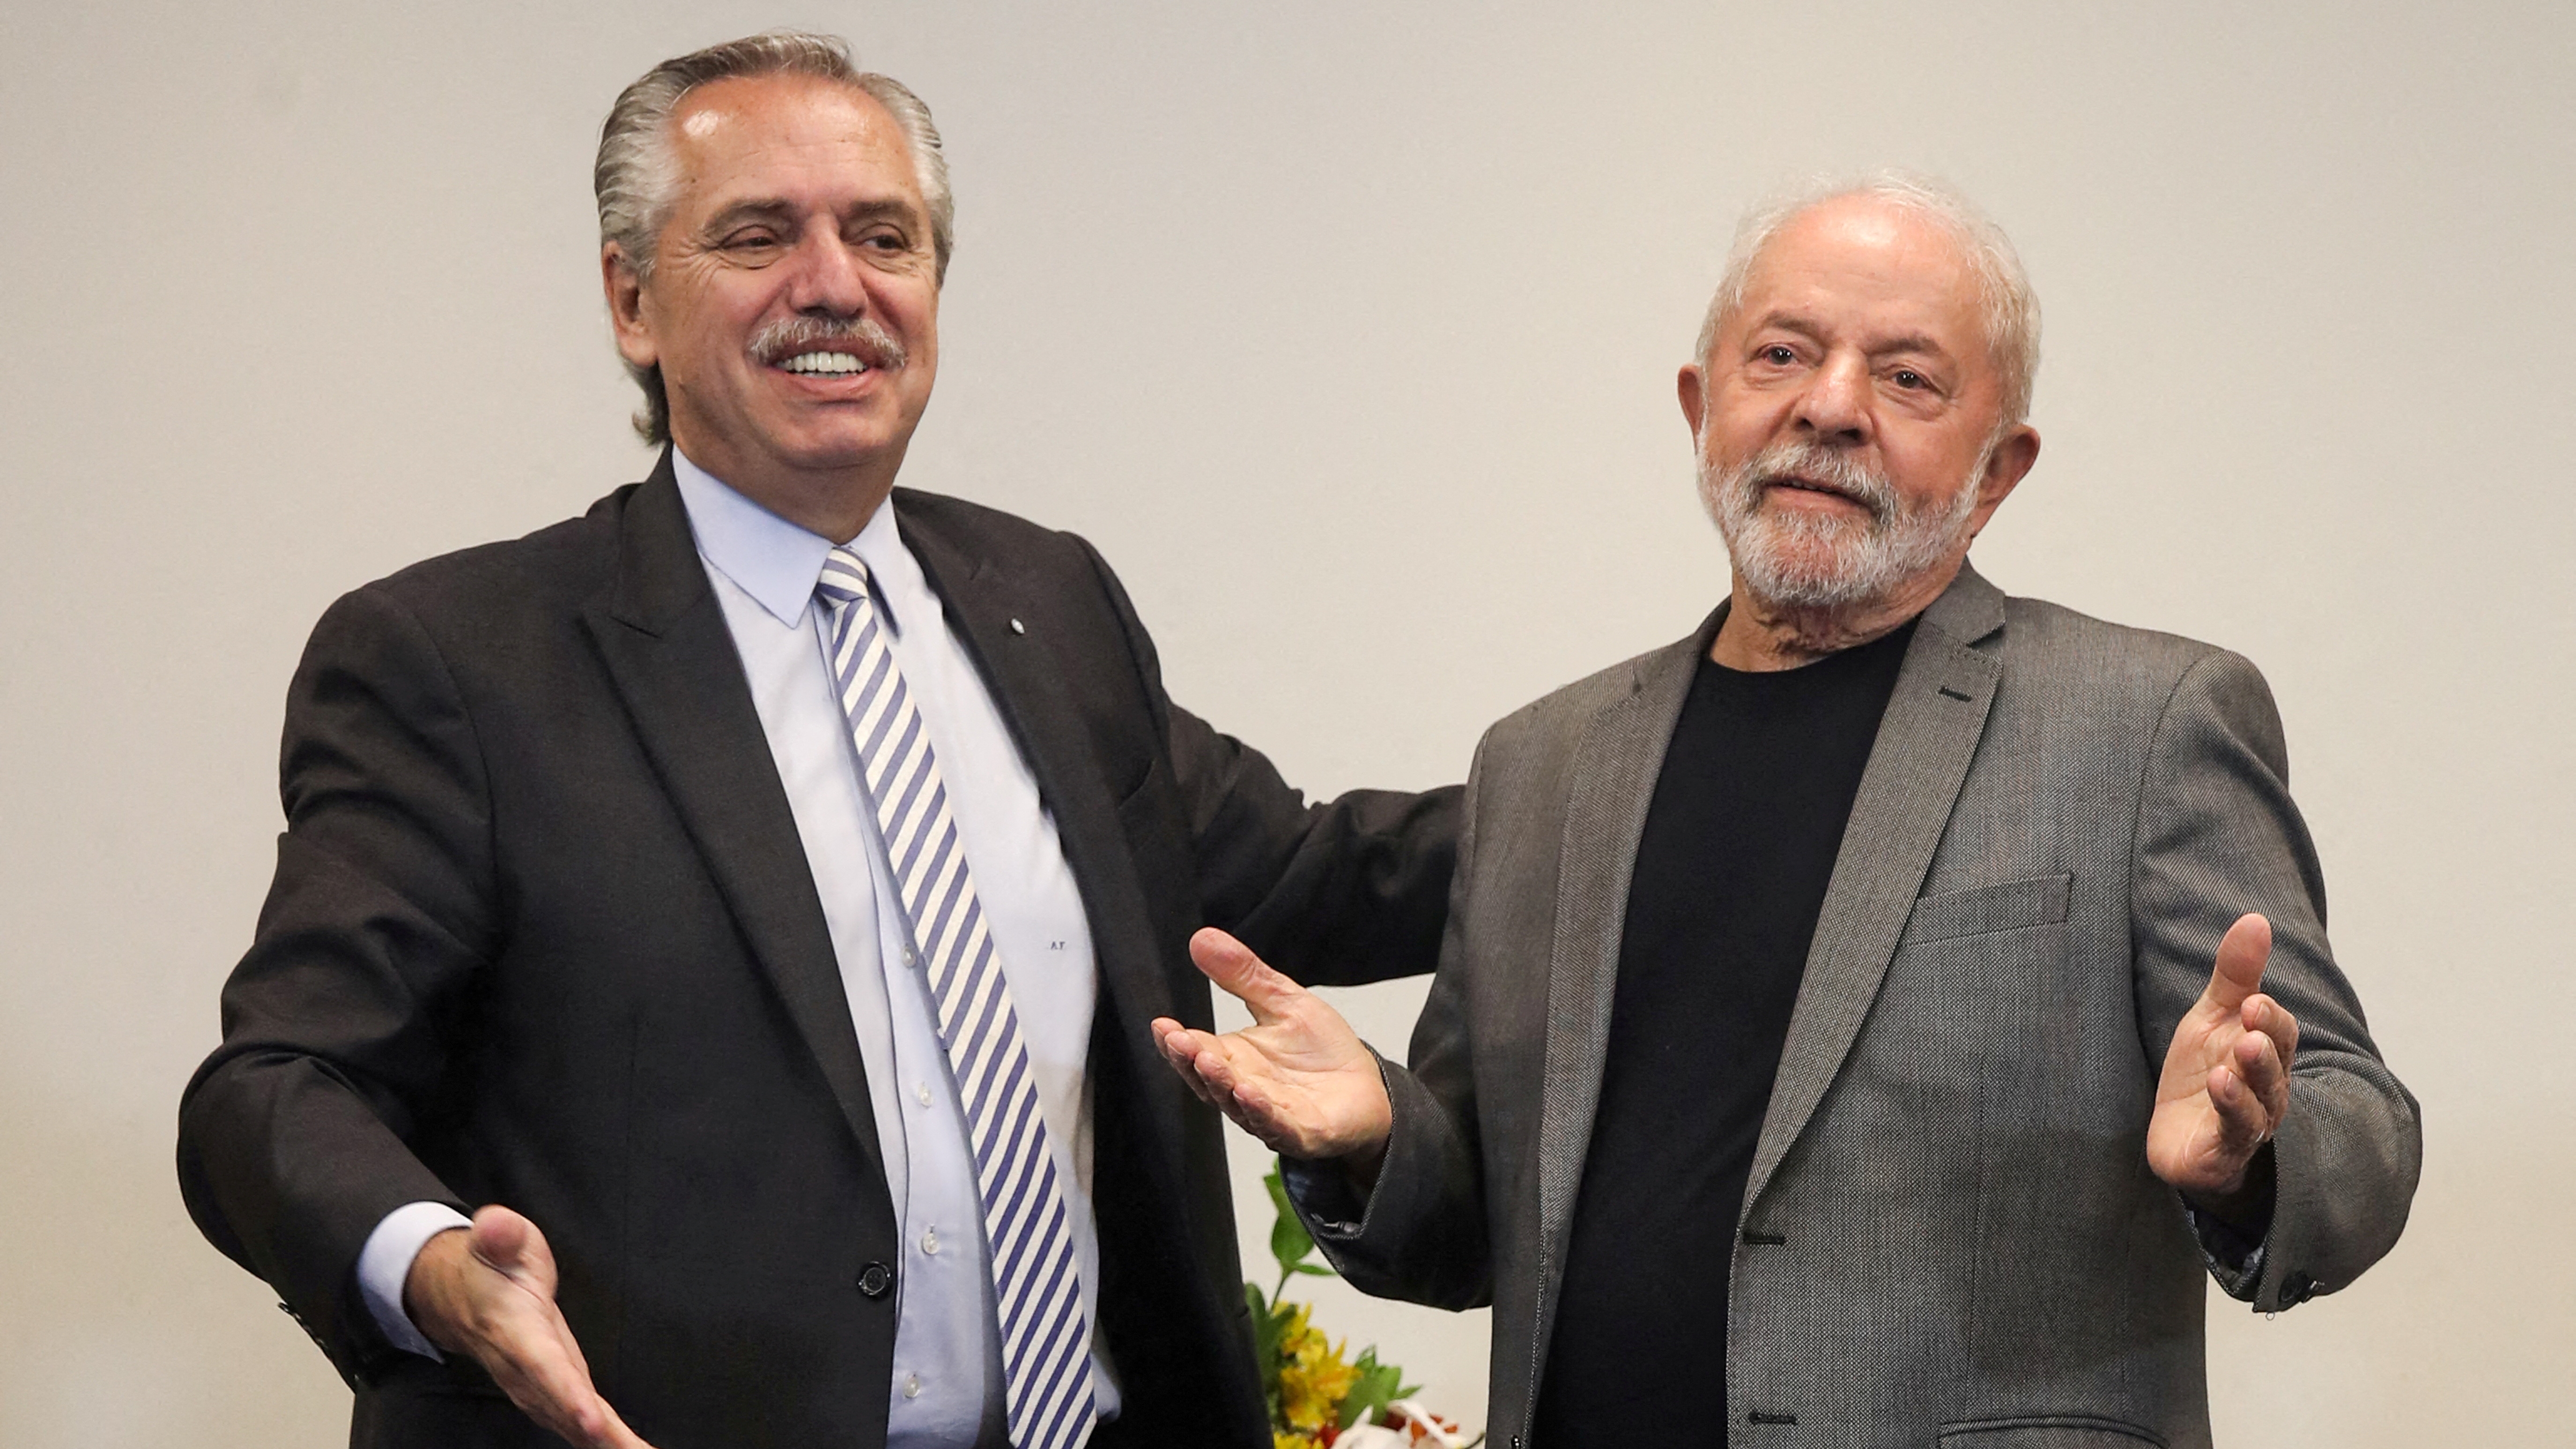 Alberto Fernández and Lula da Silva during an informal meeting in San Pablo, after the PT's victory over Jair Bolsonaro